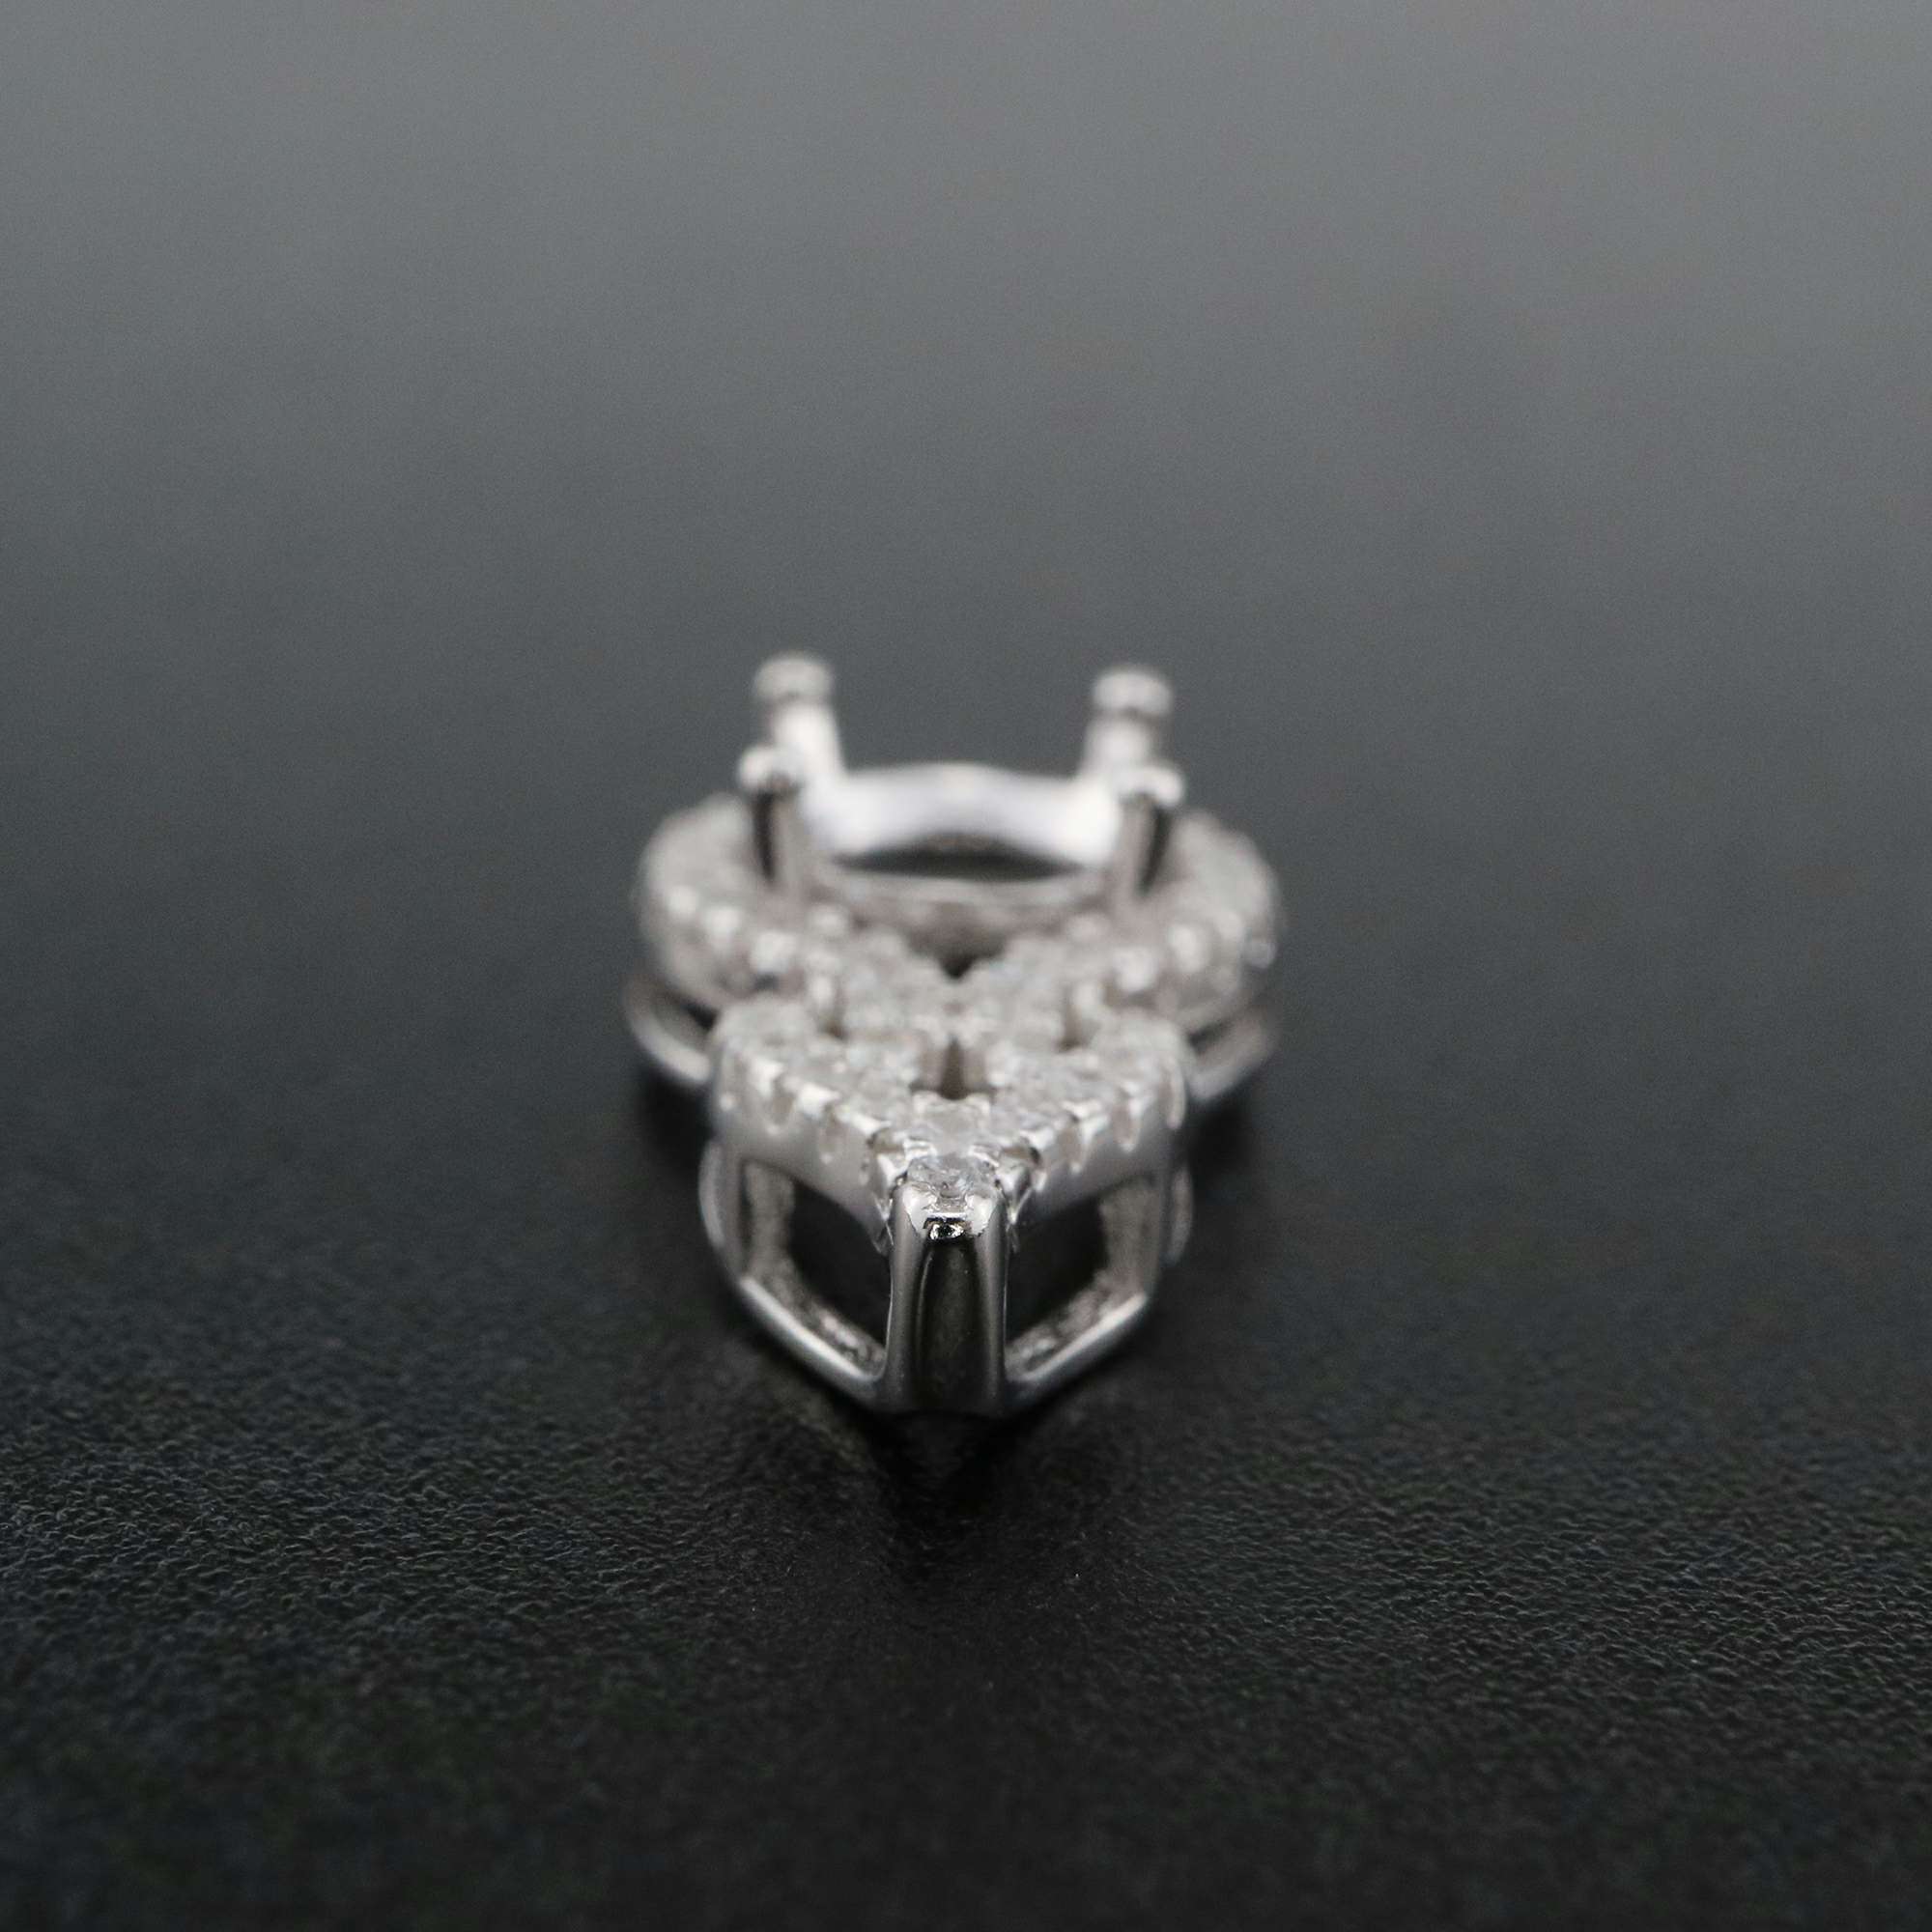 1Pcs 5-11MM Round Prong Pendant Settings Solid 925 Sterling Silver Filigree Gemstone Charm Bezel Tray DIY Supplies 1411254 - Click Image to Close